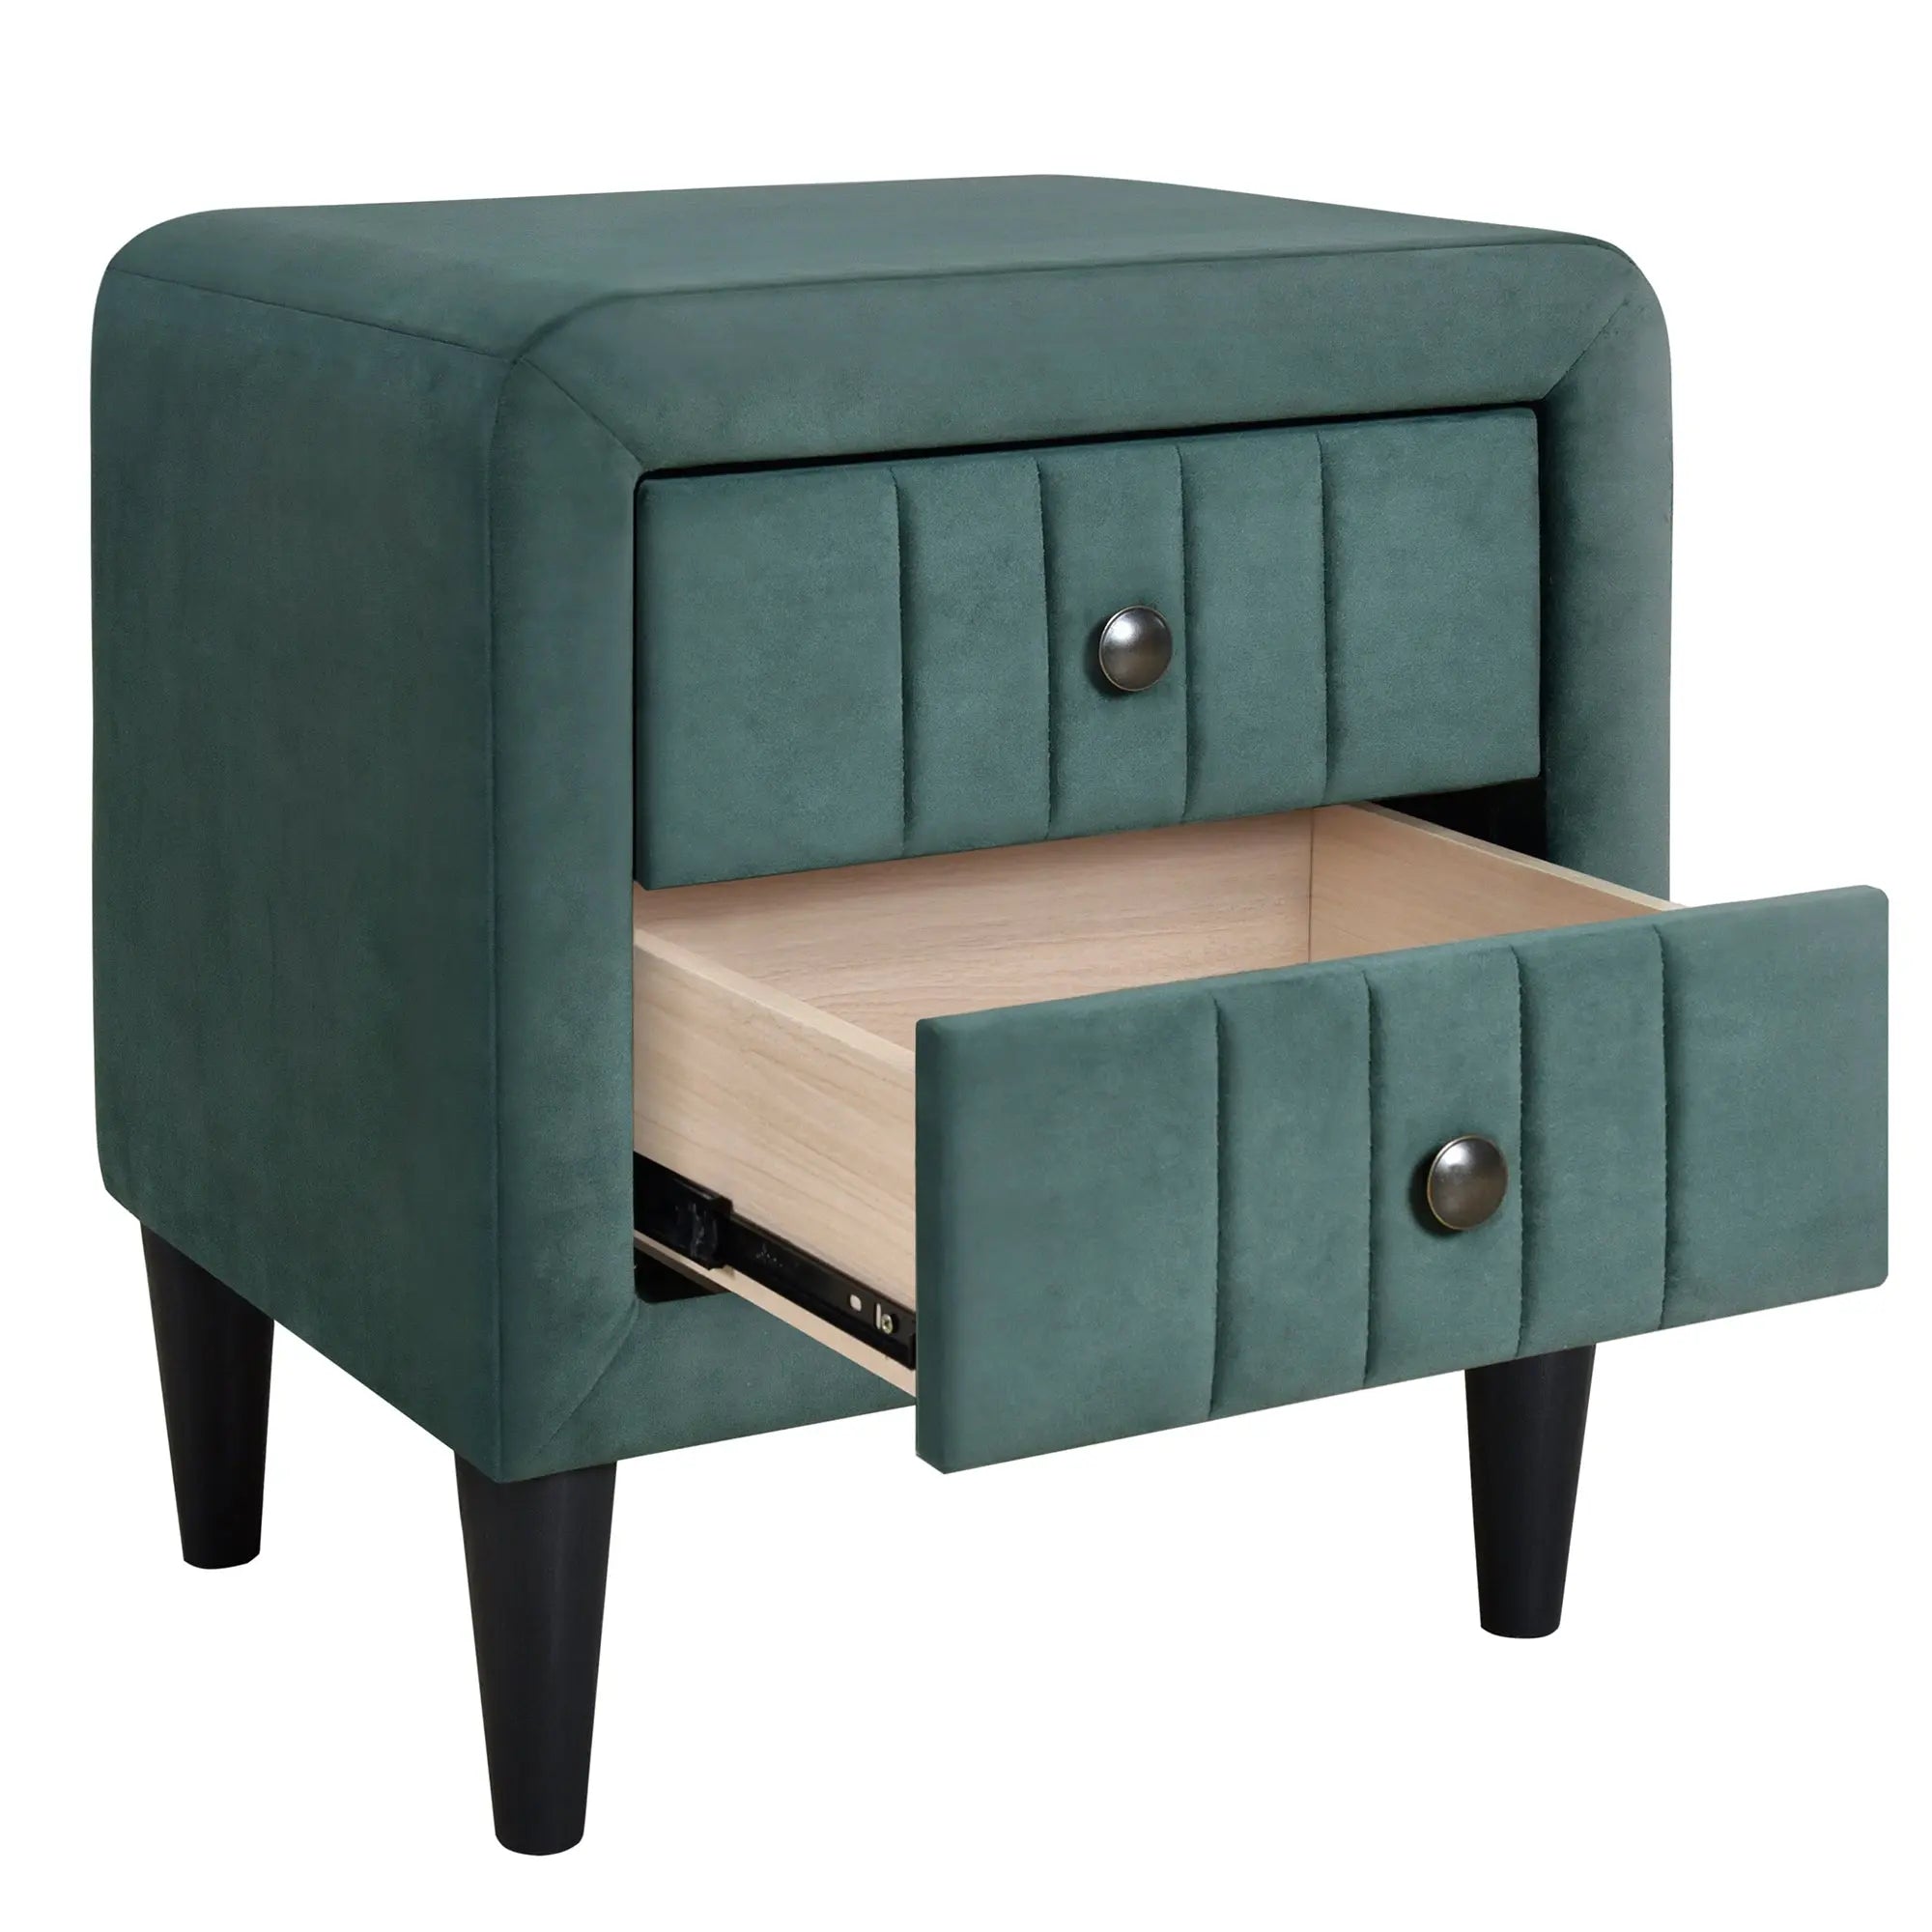 Bellemave Upholstered Wooden Nightstand with 2 Drawers Bellemave